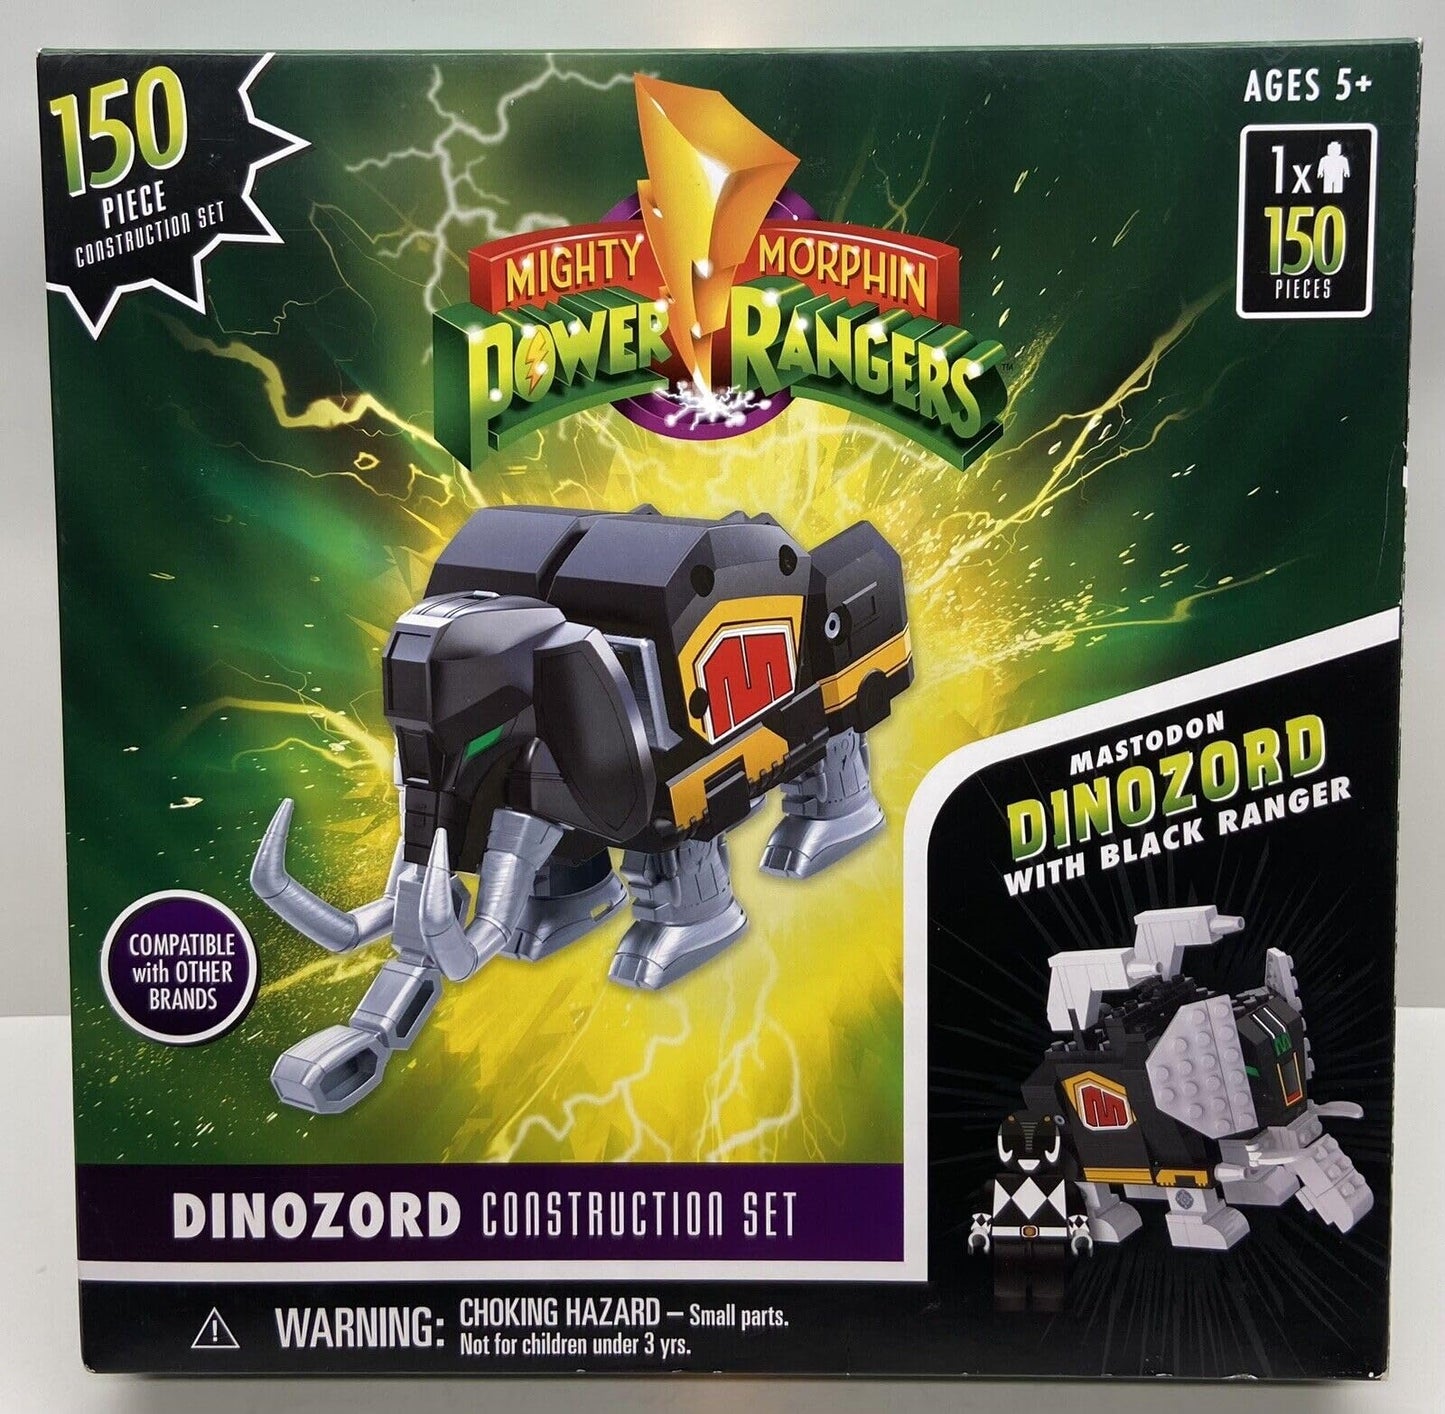 Mighty Morphin Power Ranger Toy - 150 Pcs Action Figure Construction Set - Receive 1 of 4 Dinozords + Ranger Minifigure + Decals for Kids Ages 5+ - Compatible with Other Construction Bricks